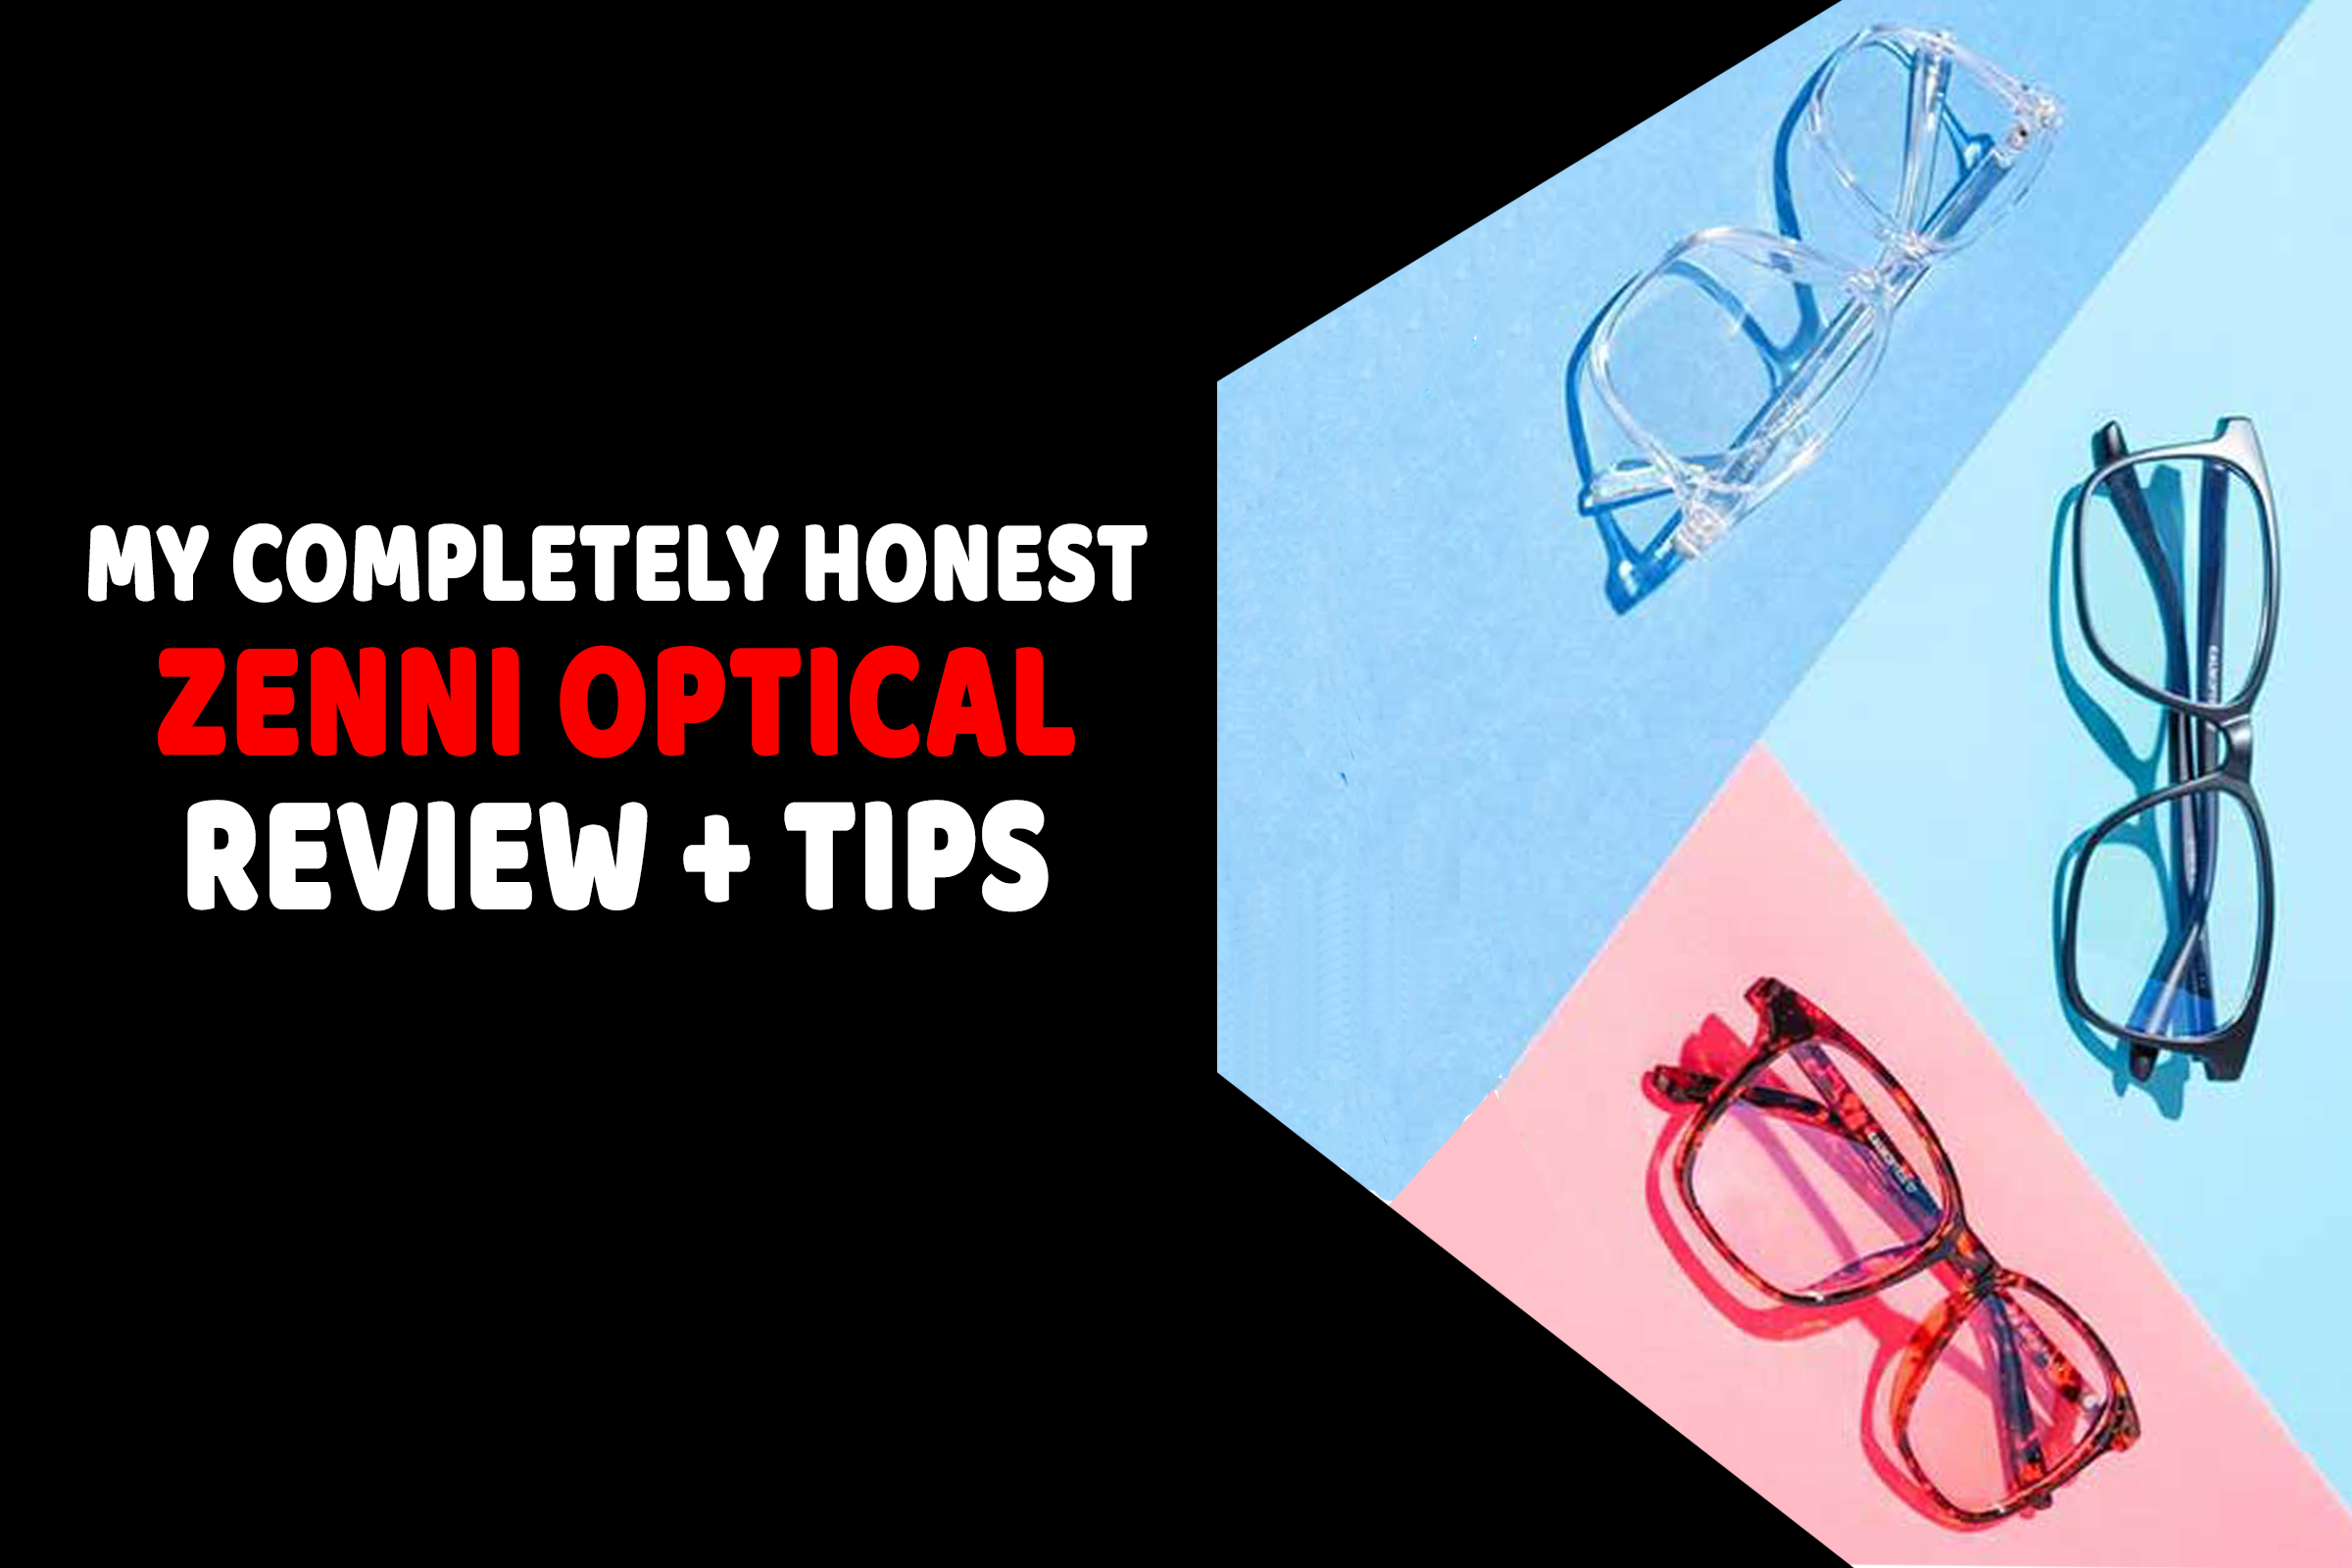 My Completely Honest Zenni Optical Review + Tips for Ordering from Zenni